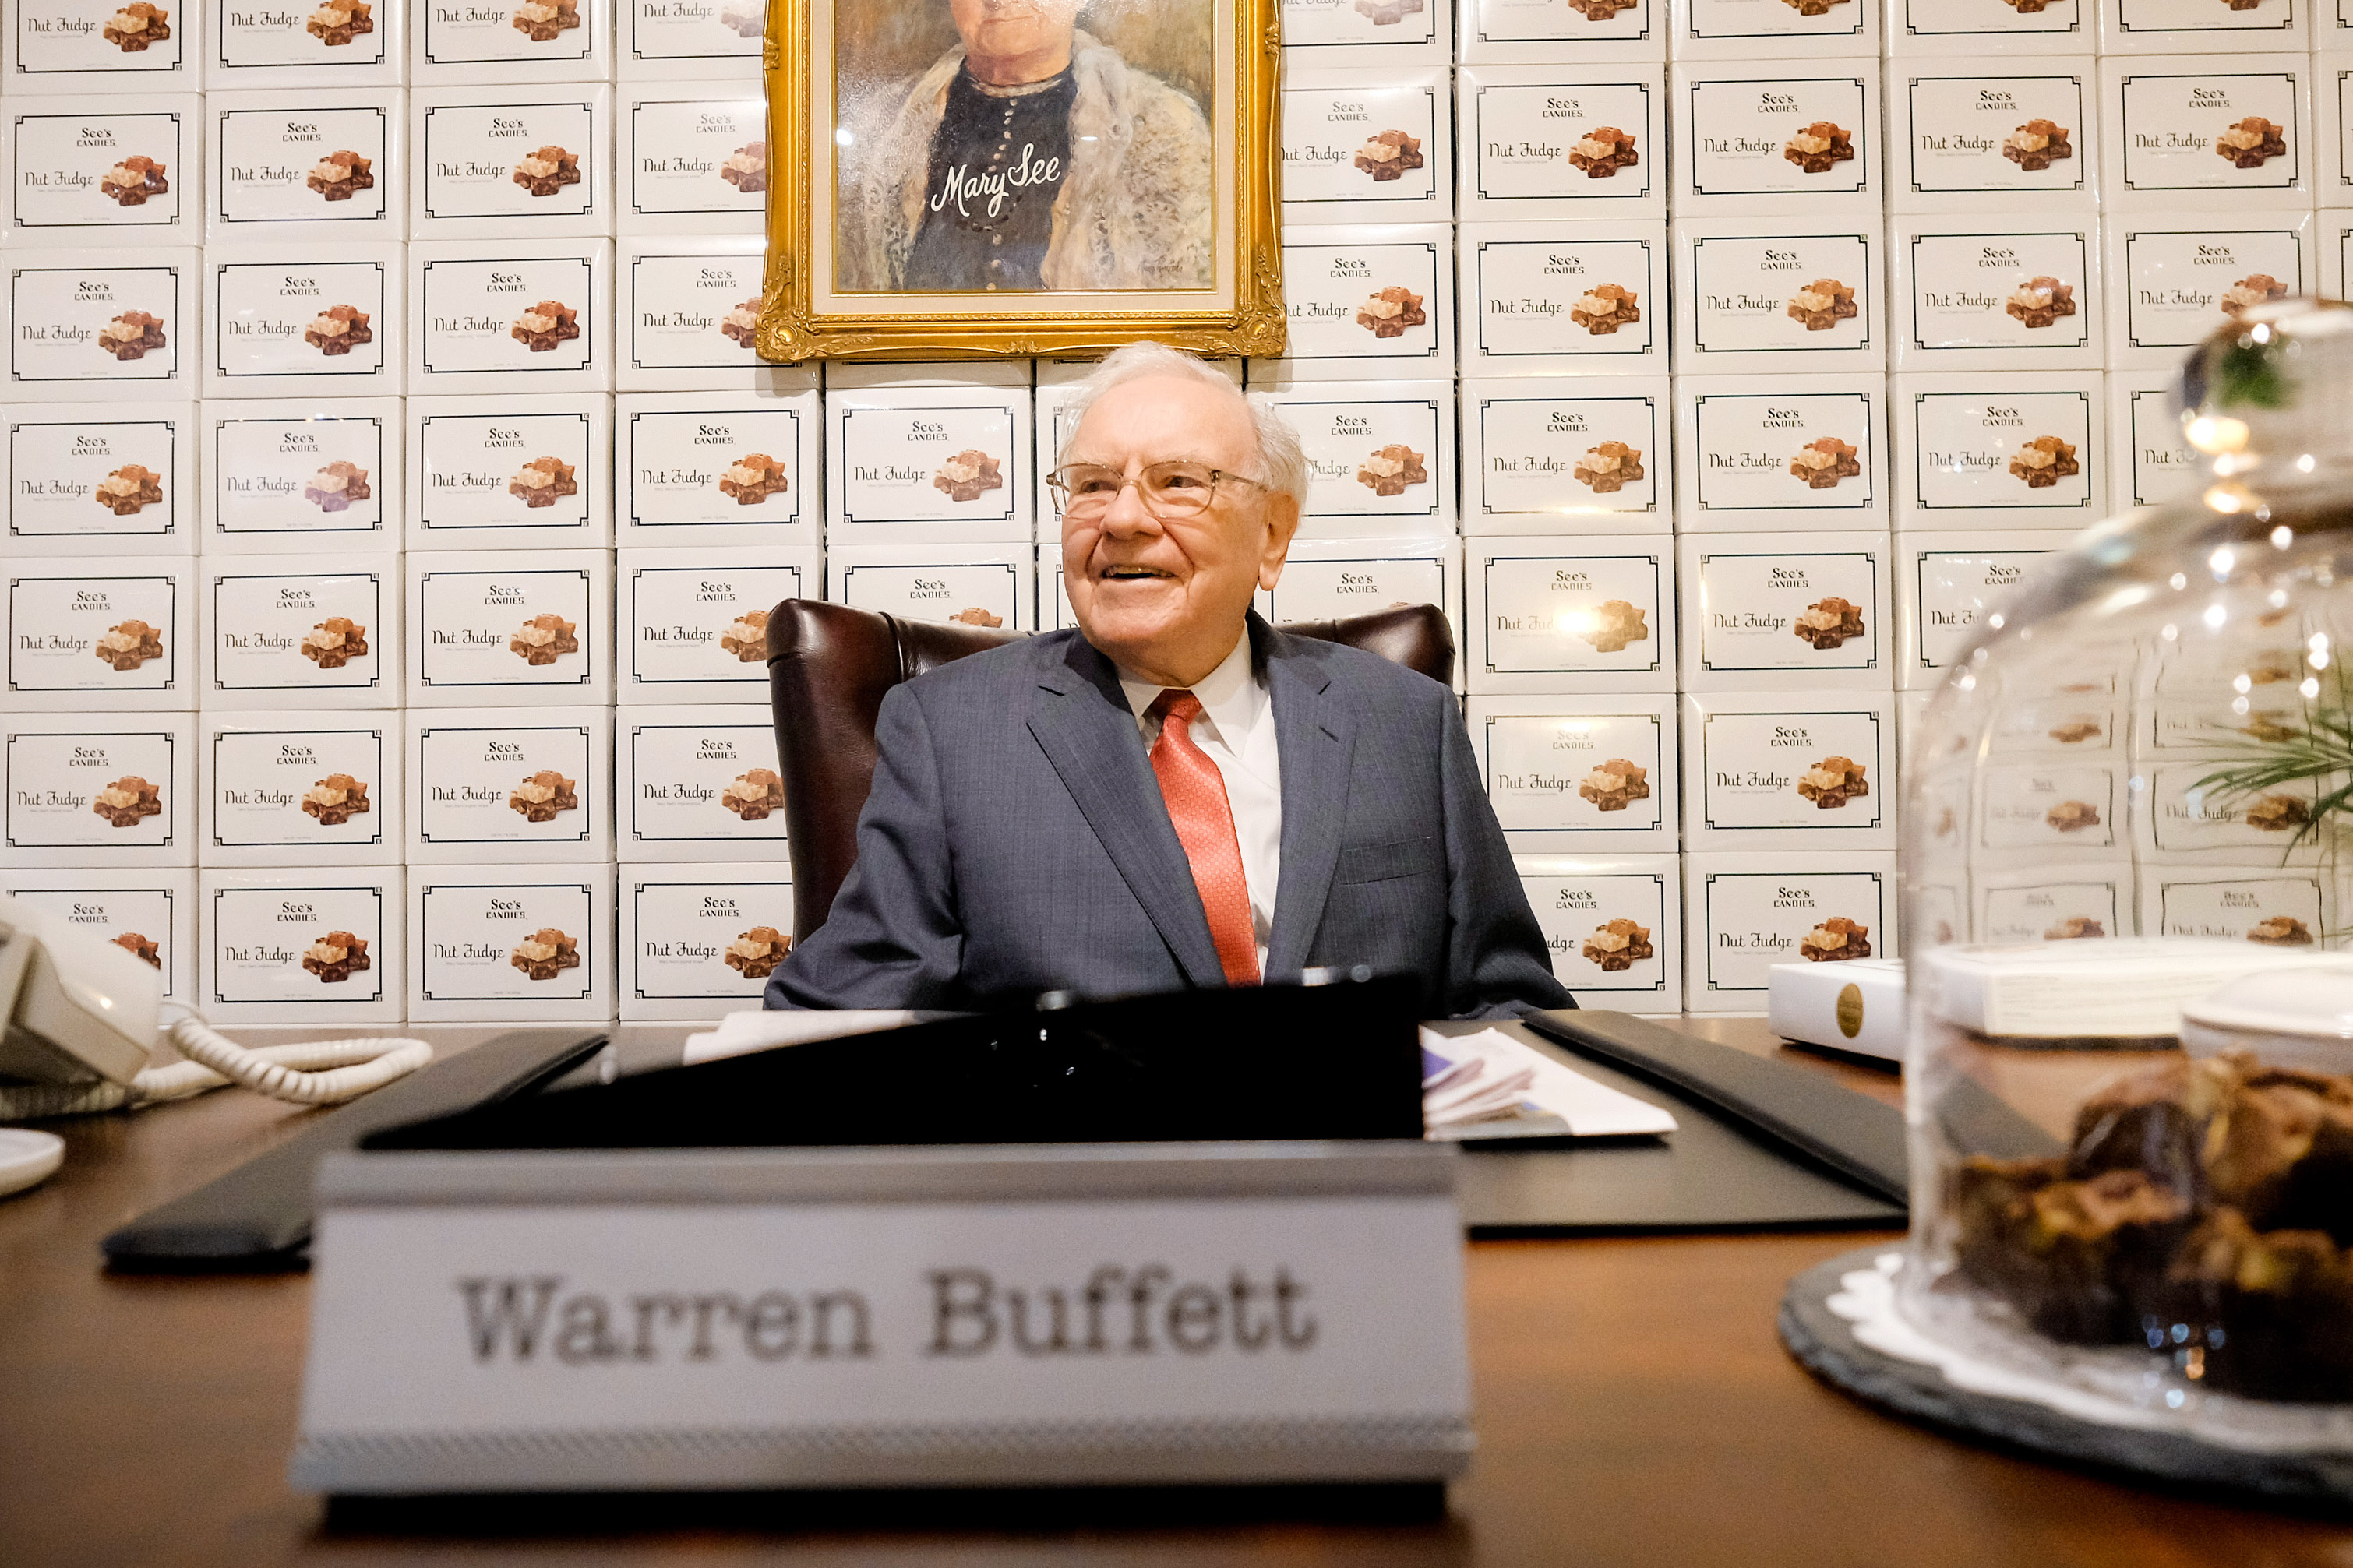 Warren Buffett wearing a blue suit with his name on the table